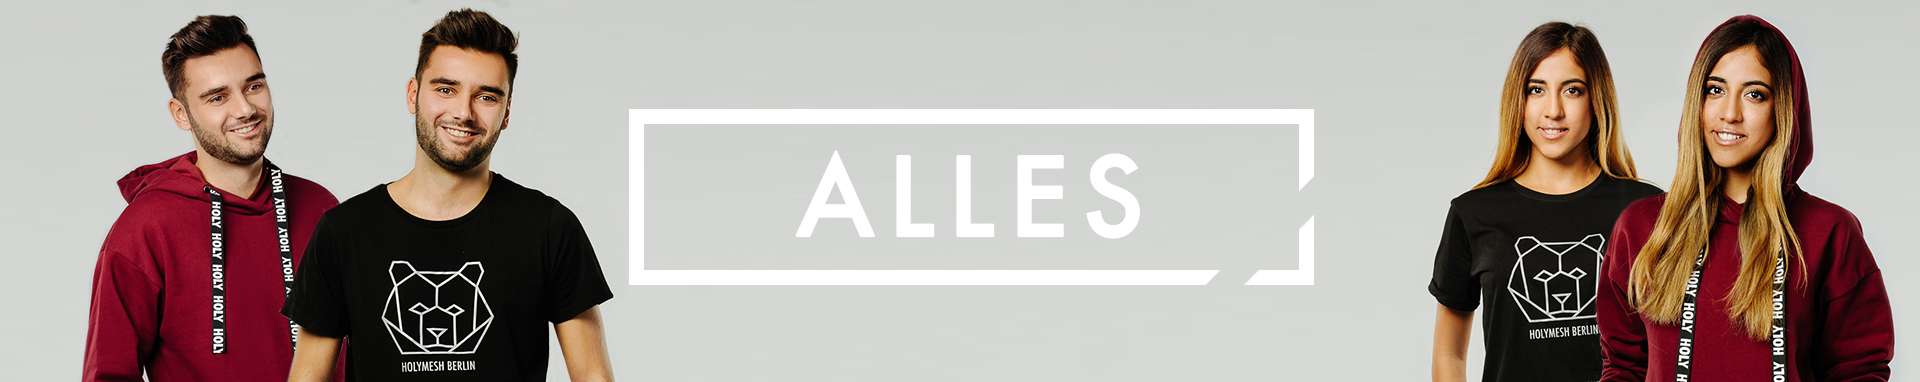 Holycollection/Alles